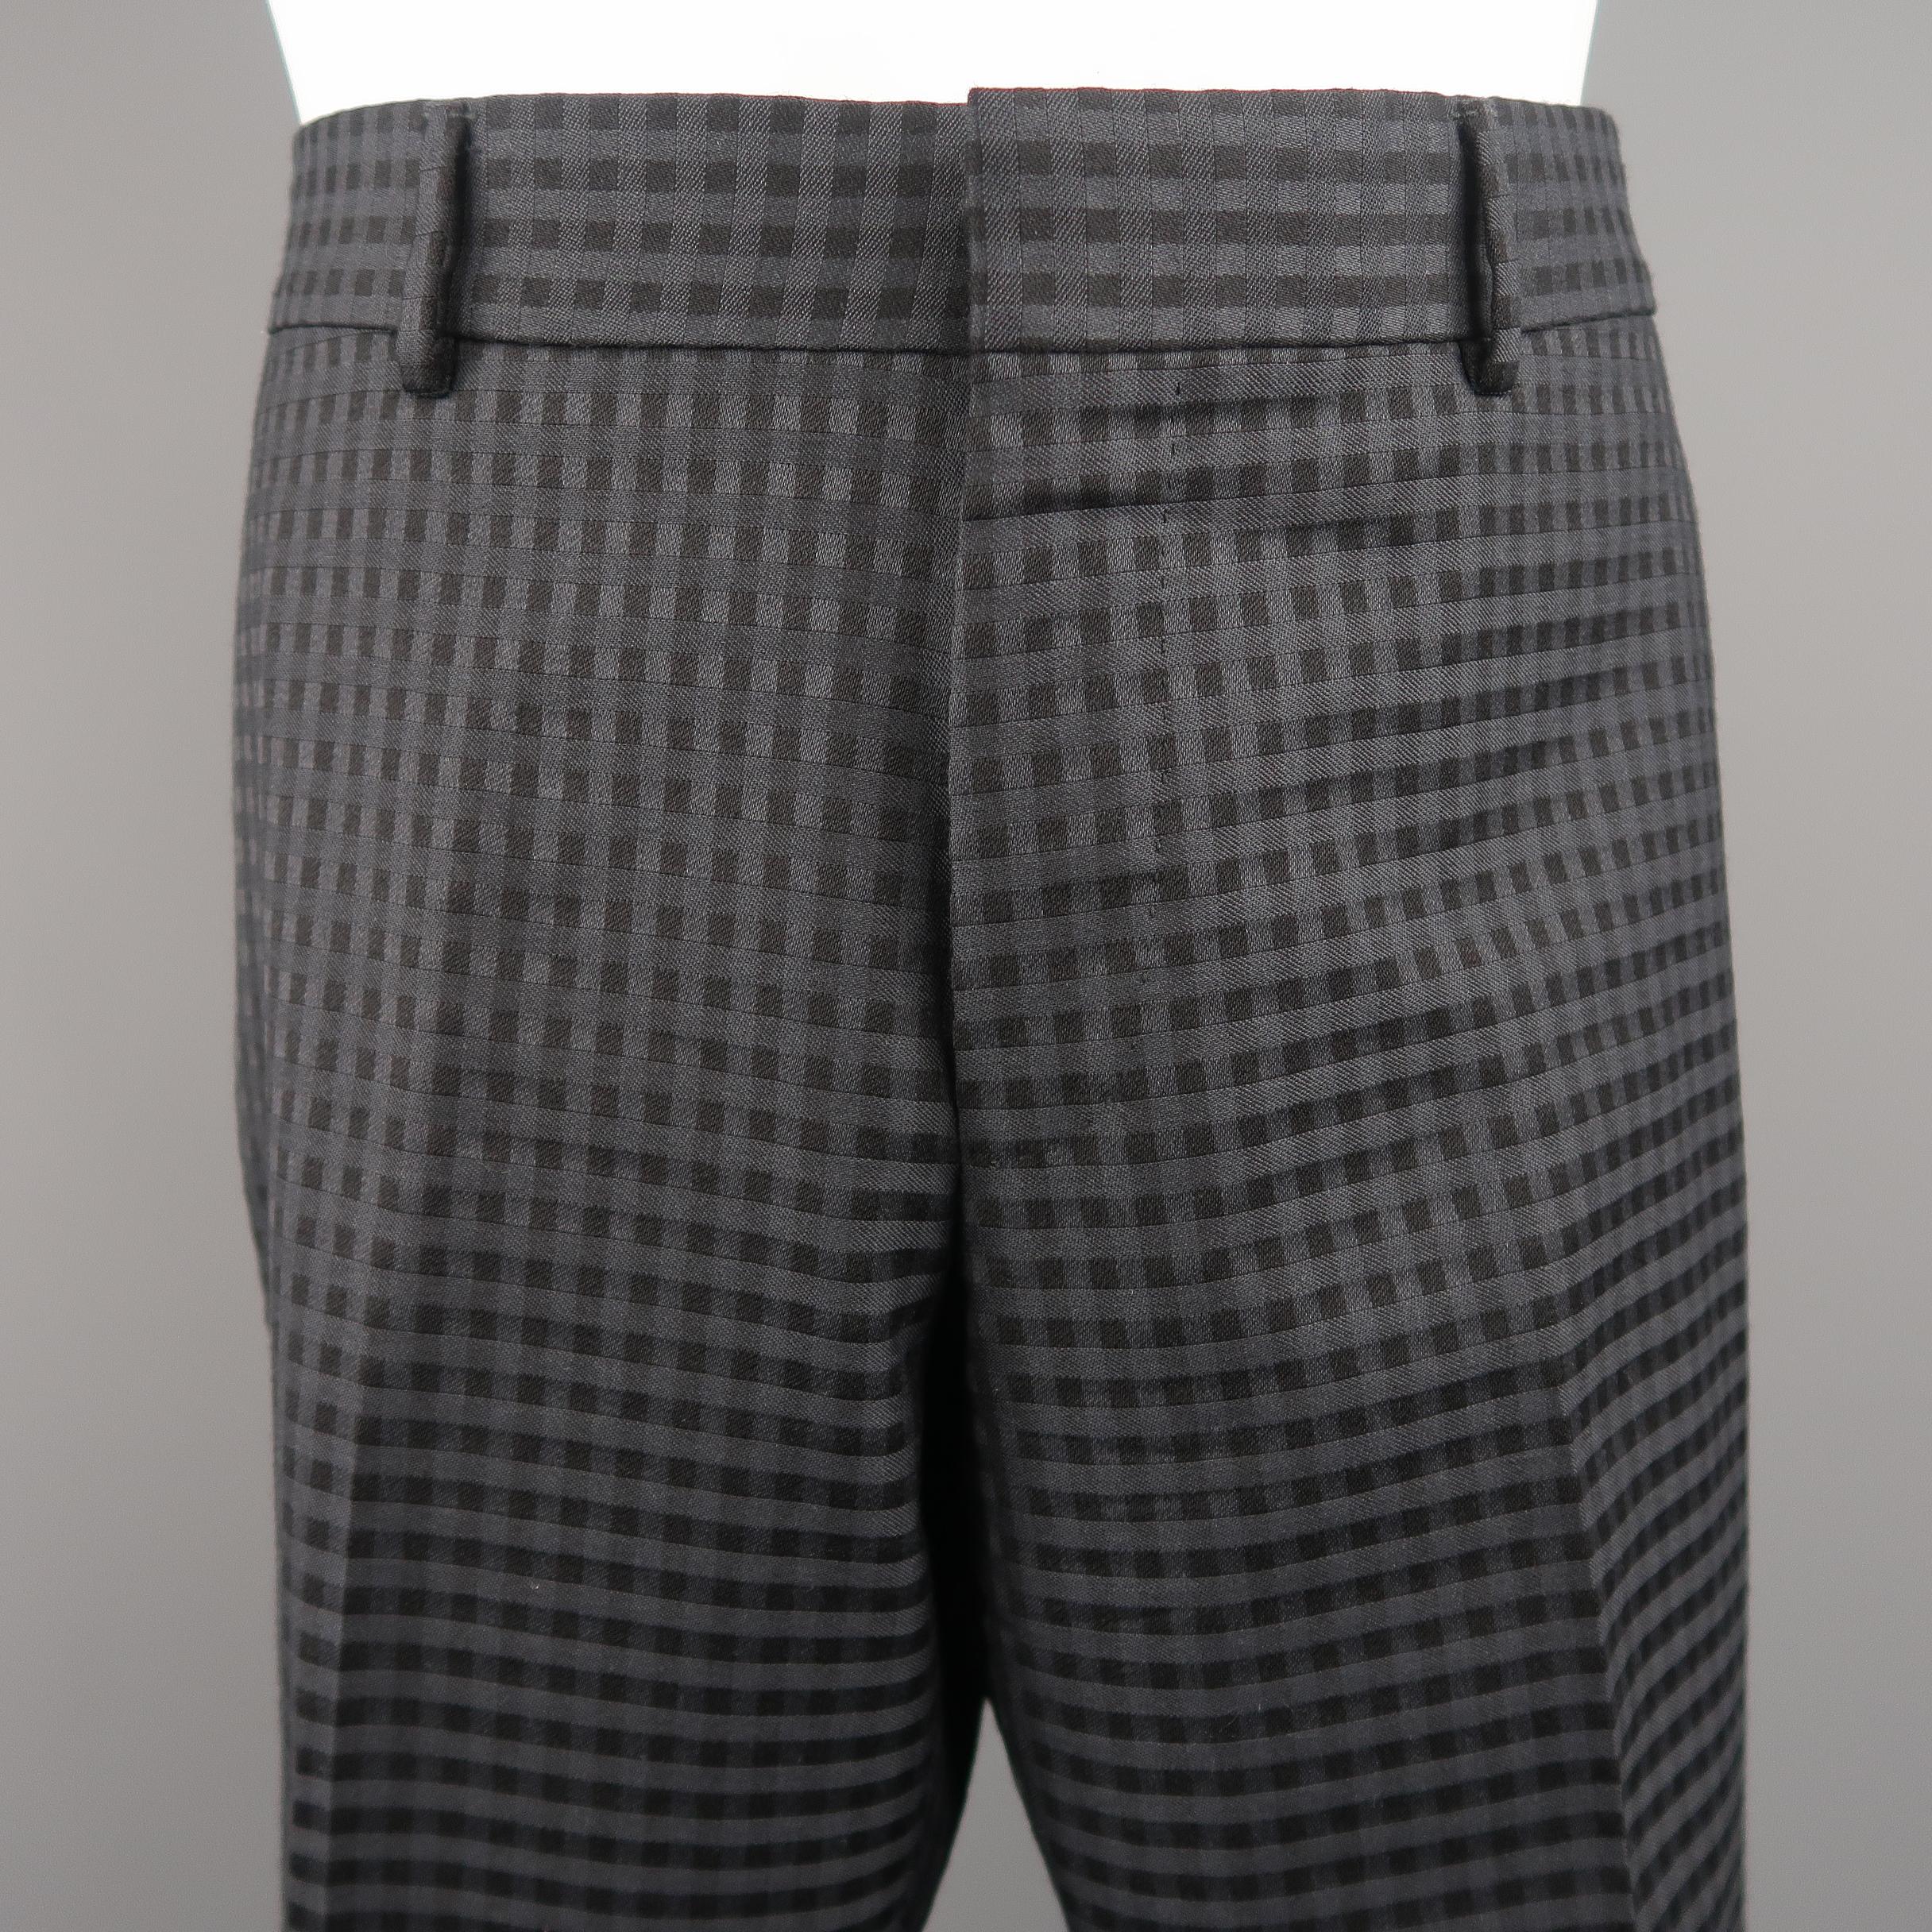 GUCCI flat front dress pants come in gingham plaid textured wool material with a tapered leg and faux slit back pockets. Made in Switzerland.
Excellent Pre-Owned Condition.
Marked: IT 48
 
Measurements:
Waist: 36 in.
Rise: 9 in.
Inseam: 30 in.